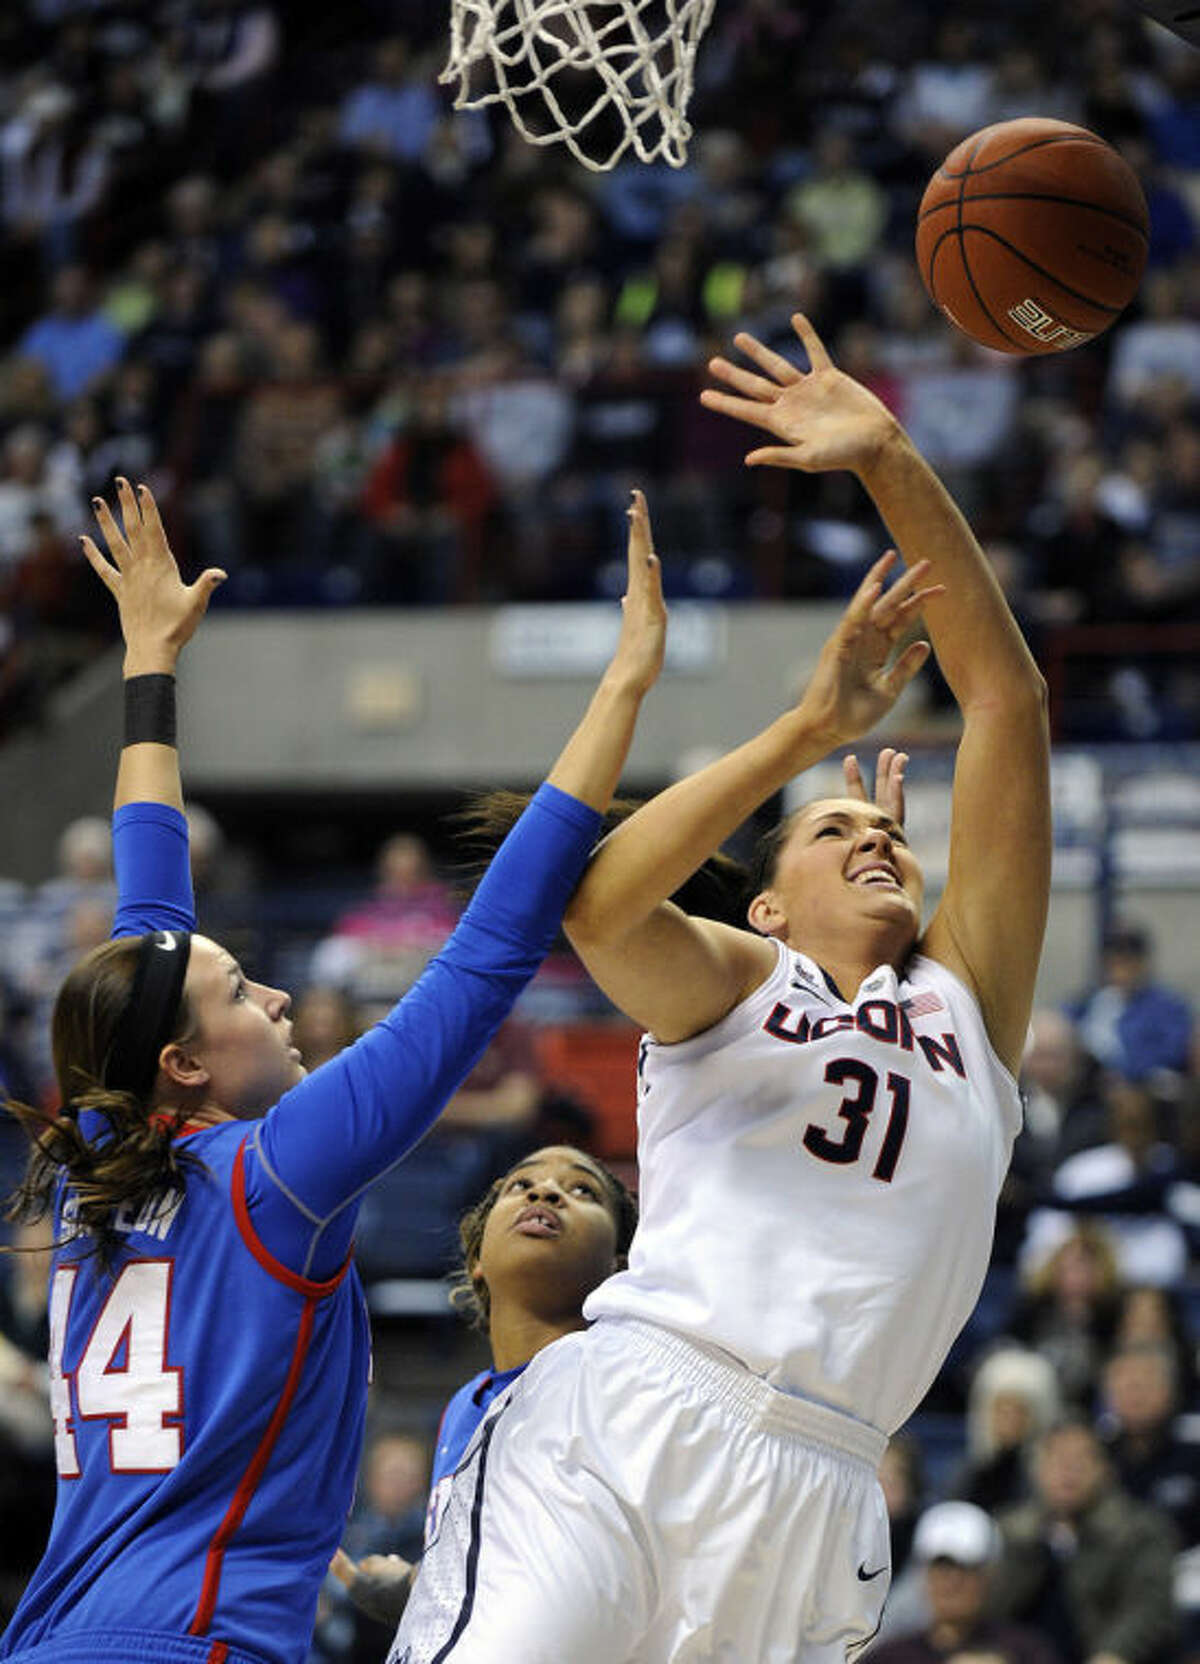 Connecticut's Stefanie Dolson (31) drives past SMU's Mallory Singleton (44) during the first half of an NCAA college basketball game in Storrs, Conn., Tuesday, Feb. 4, 2014. (AP Photo/Fred Beckham)